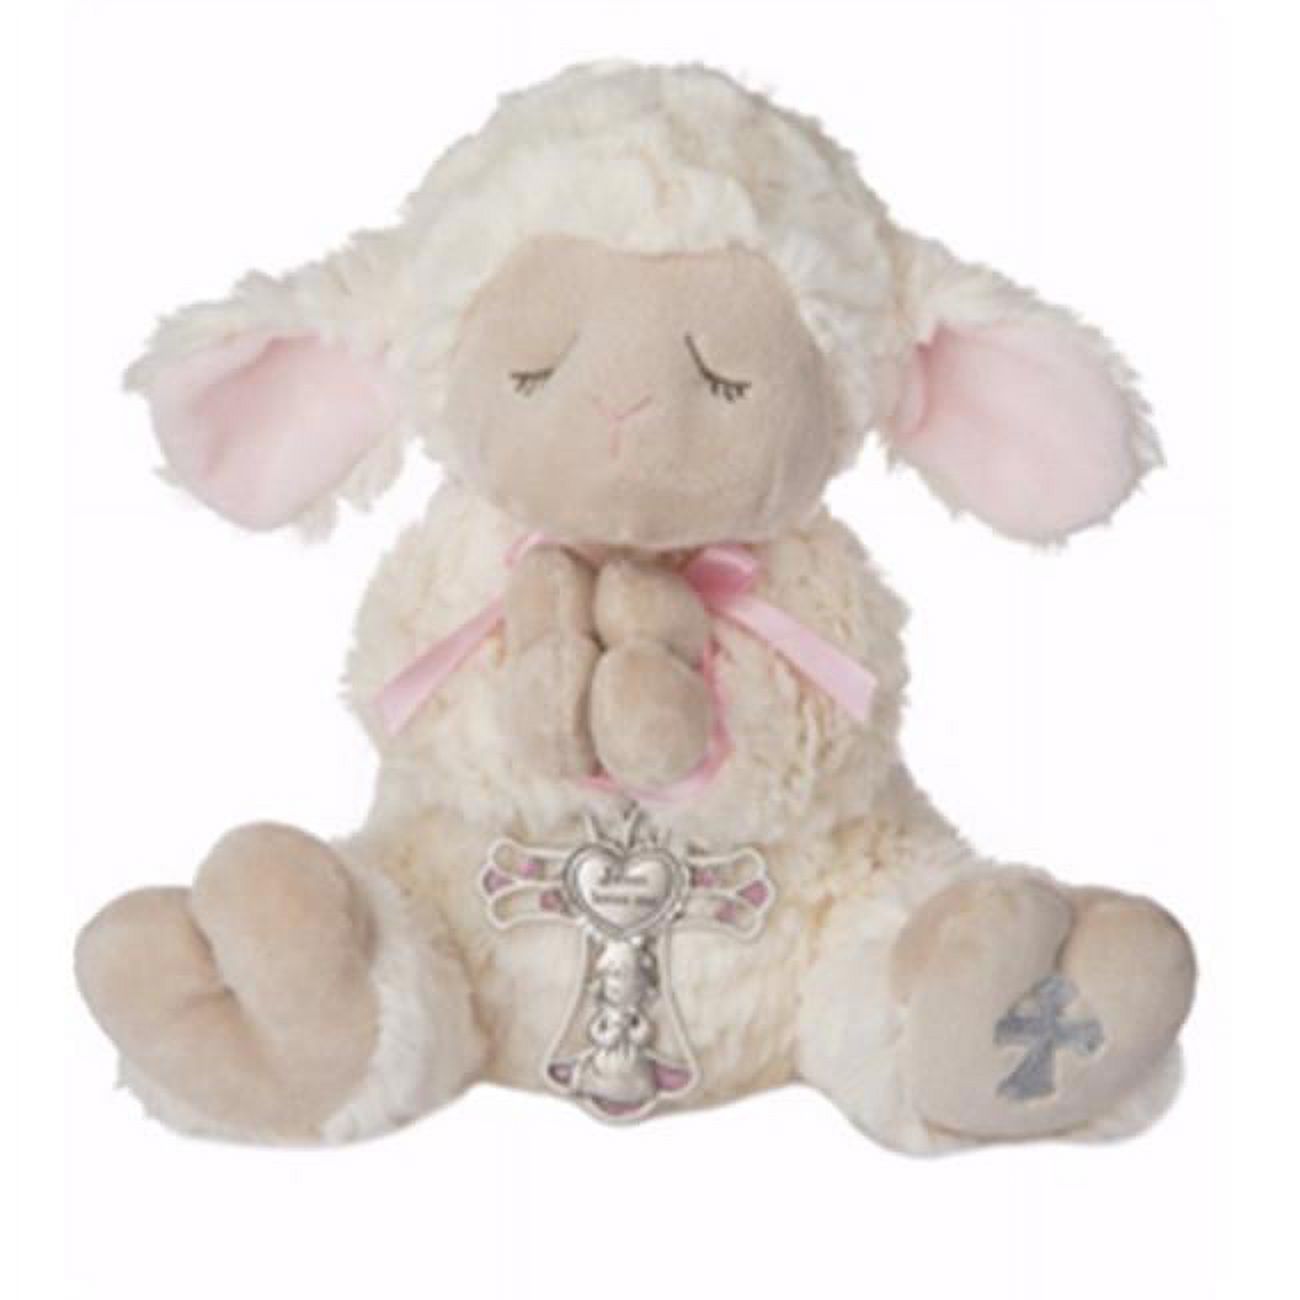 Ganz Serenity Lamb With Crib Cross Christening or Baptism Gift (Pink (Girl)) - image 1 of 2